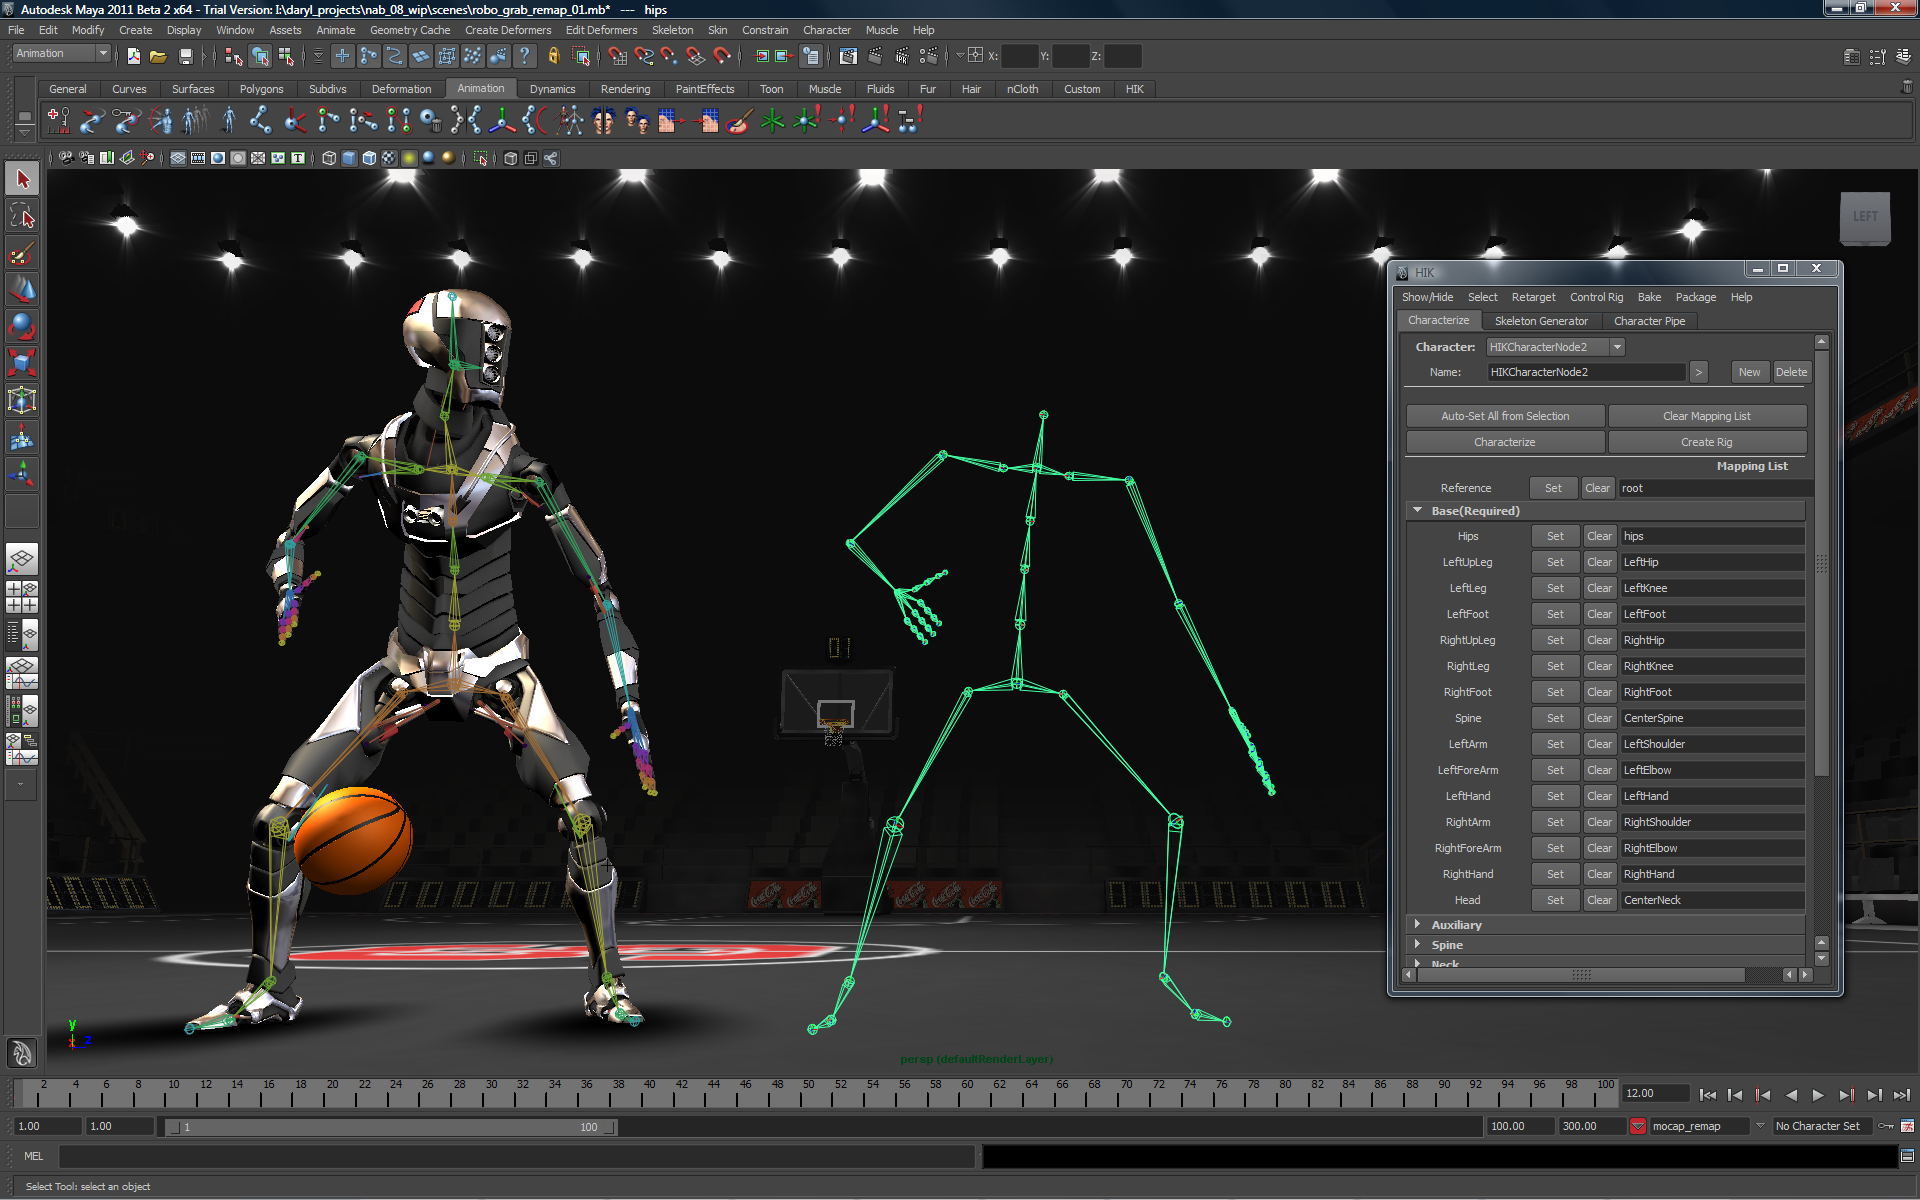 Autodesk Gives Away $25m in Free 3D Modeling Software to Students